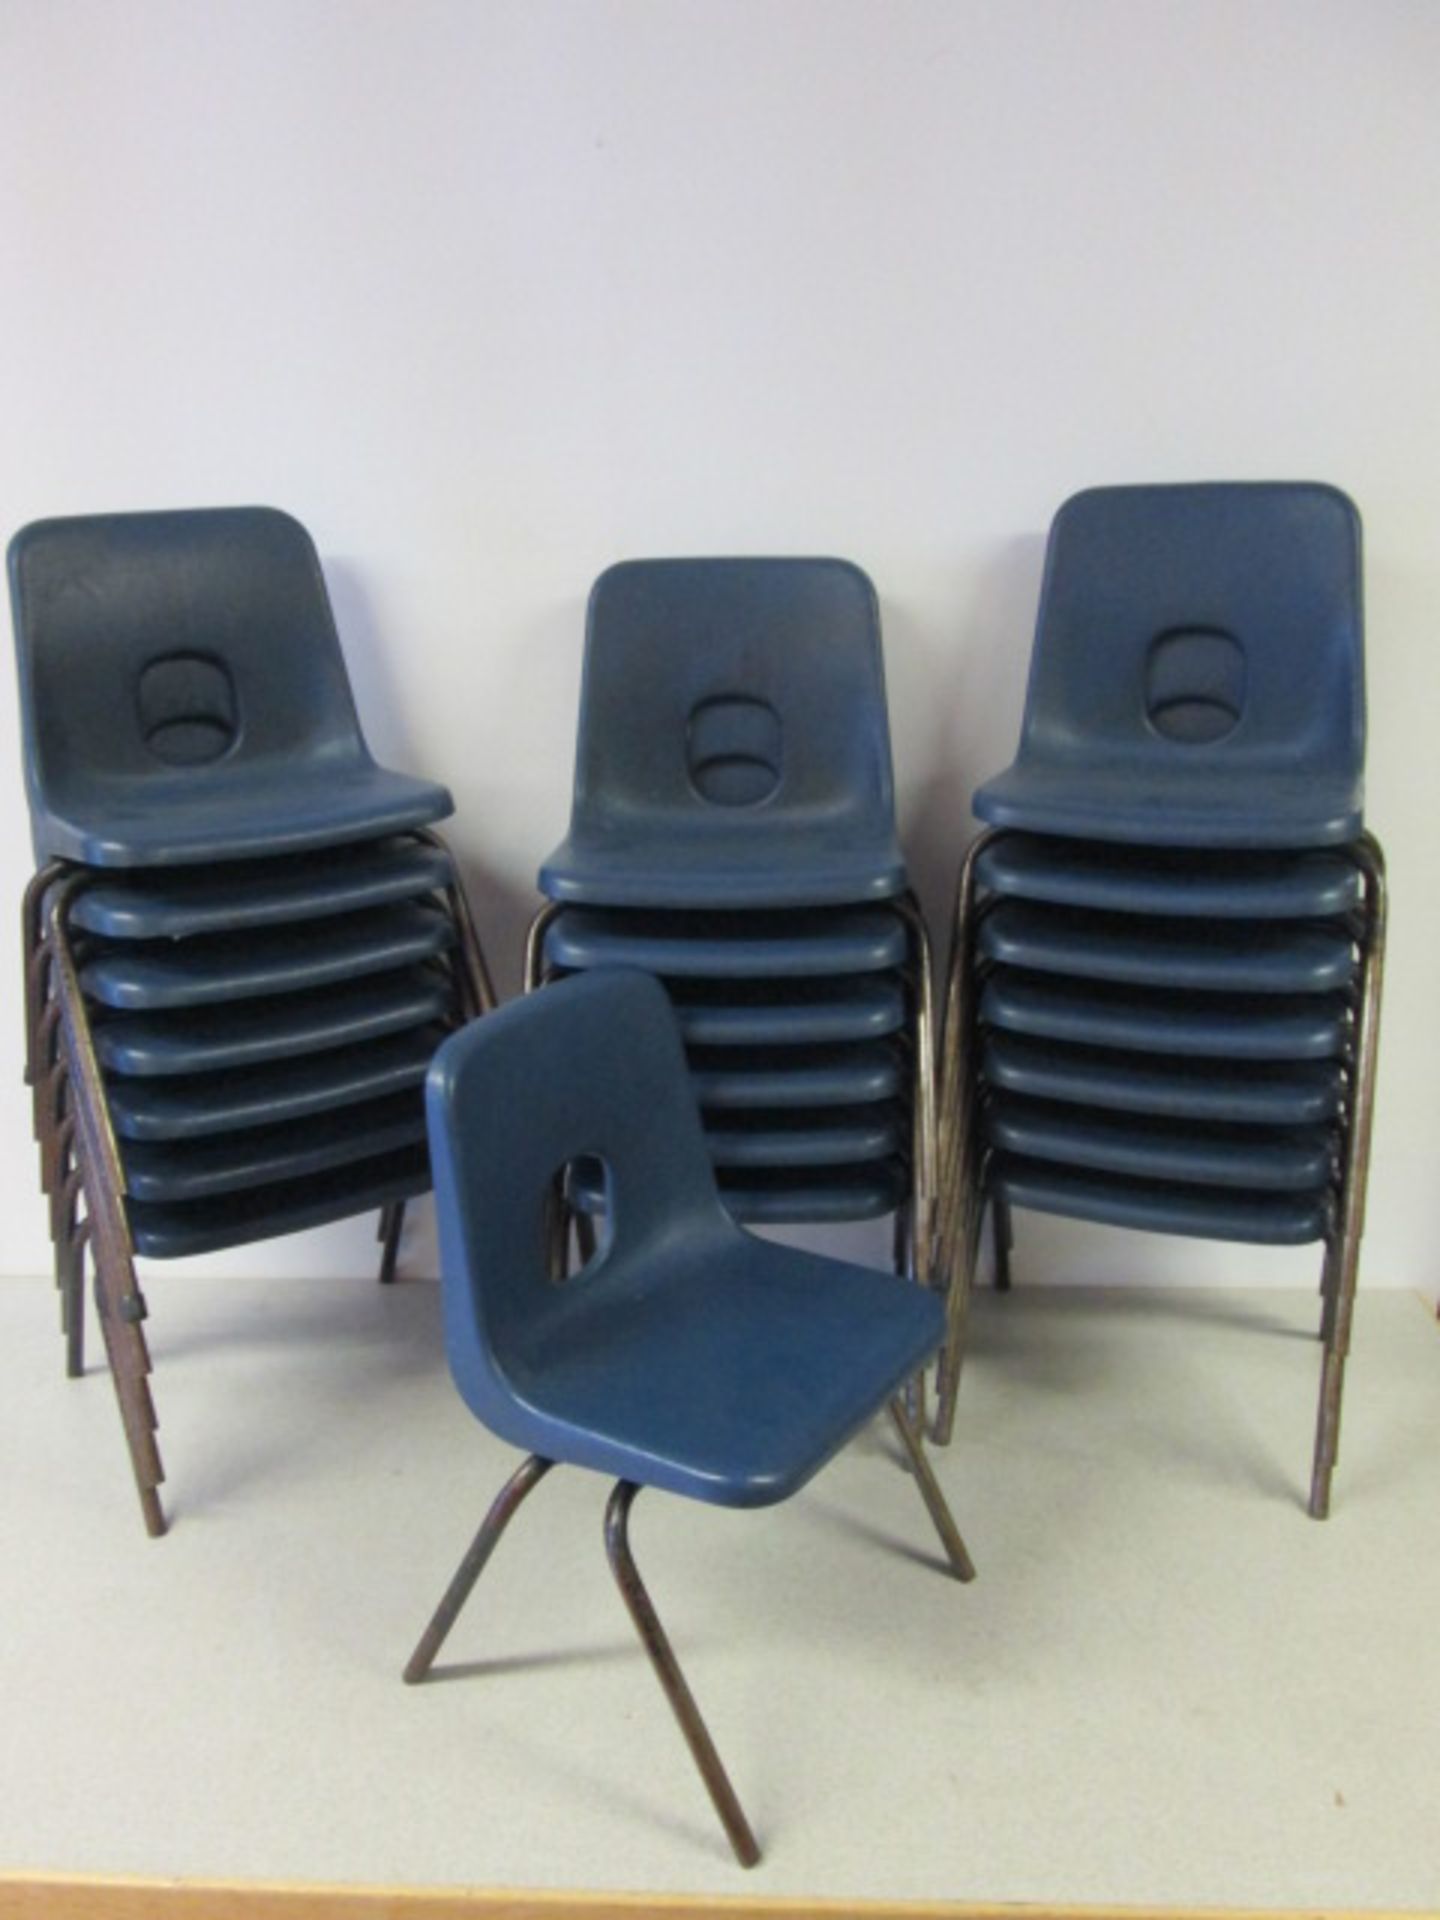 21 x Hille Series E Overall, Children's Classroom Stacking Chairs in Blue. Size (H) 50cm x (W)